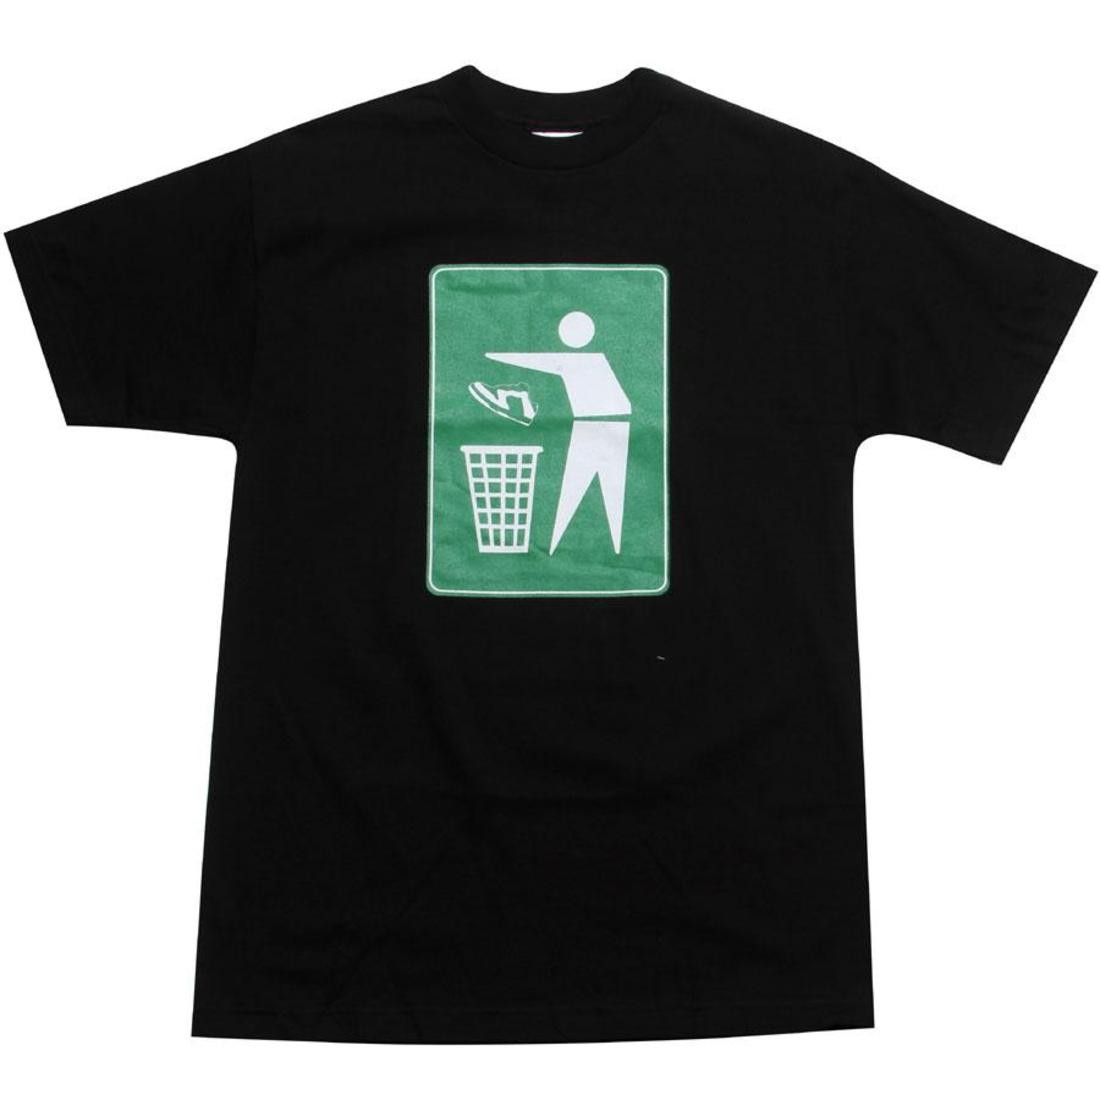 Playing For Keeps Shoe Recycle Tee (black)